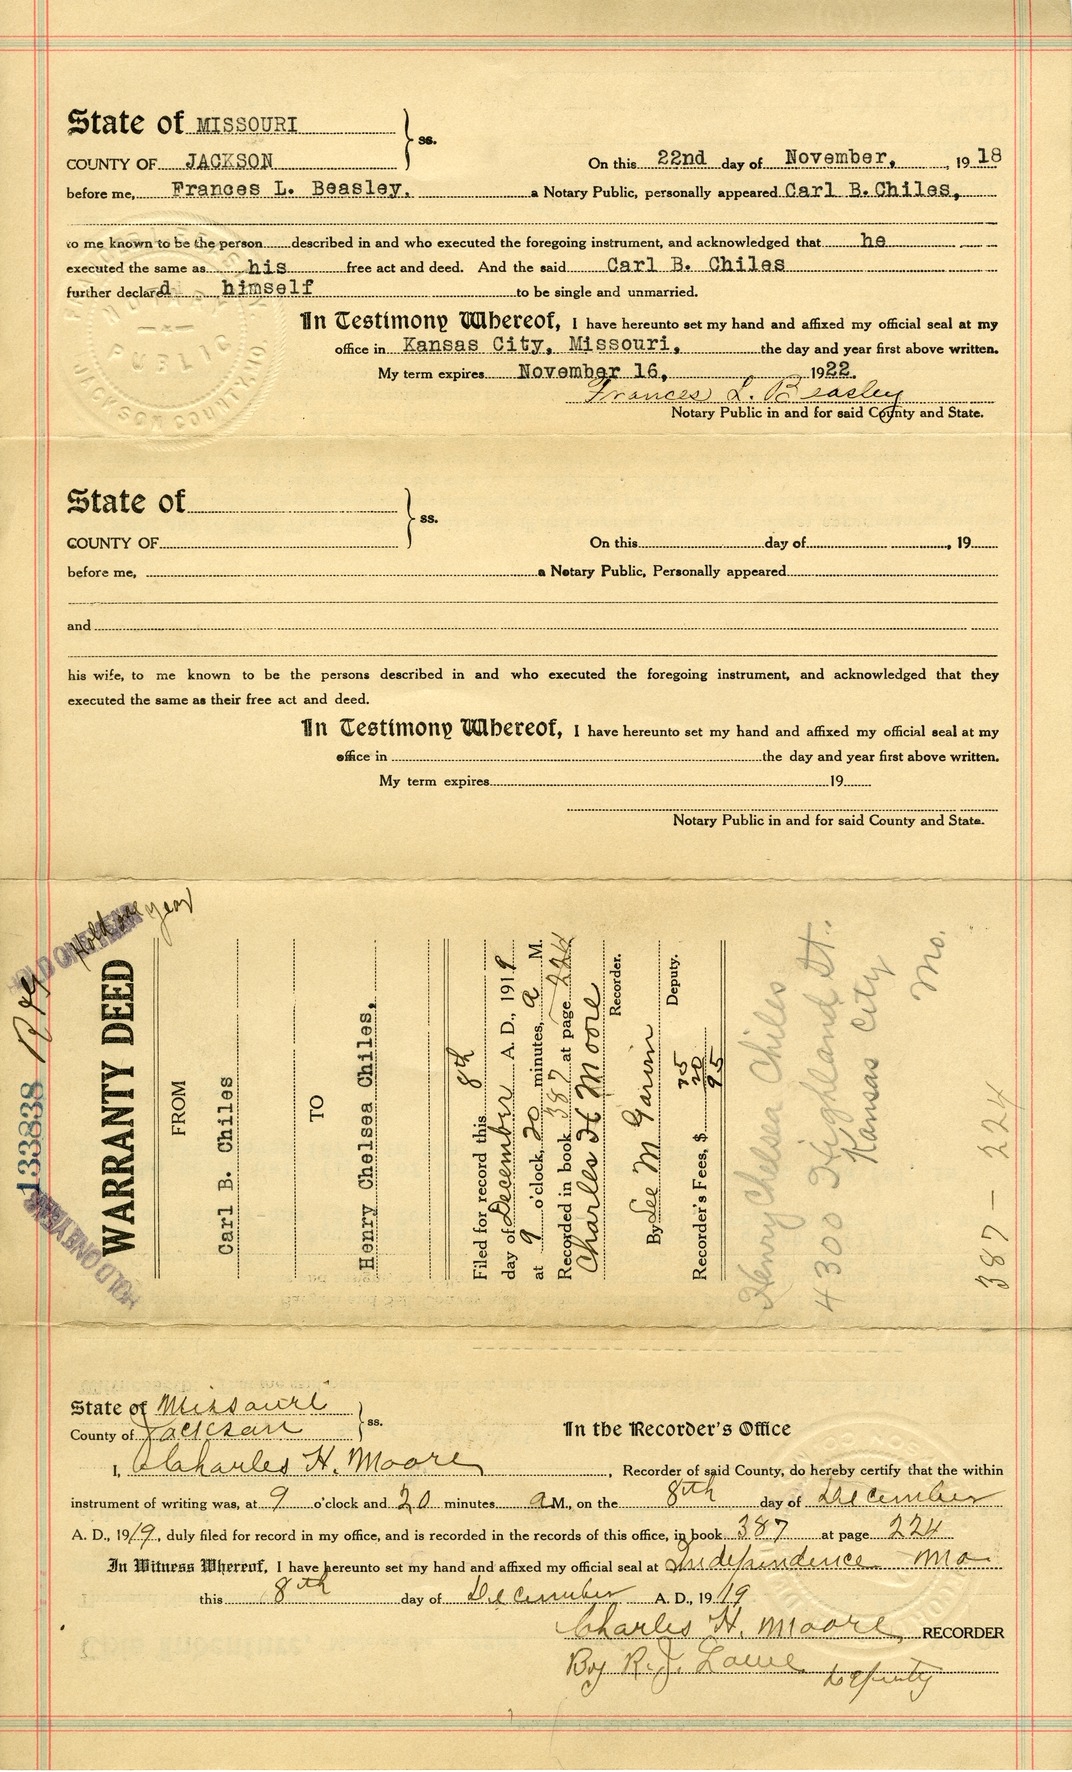 Warranty Deed from Carl B. Chiles to Henry Chelsea Chiles